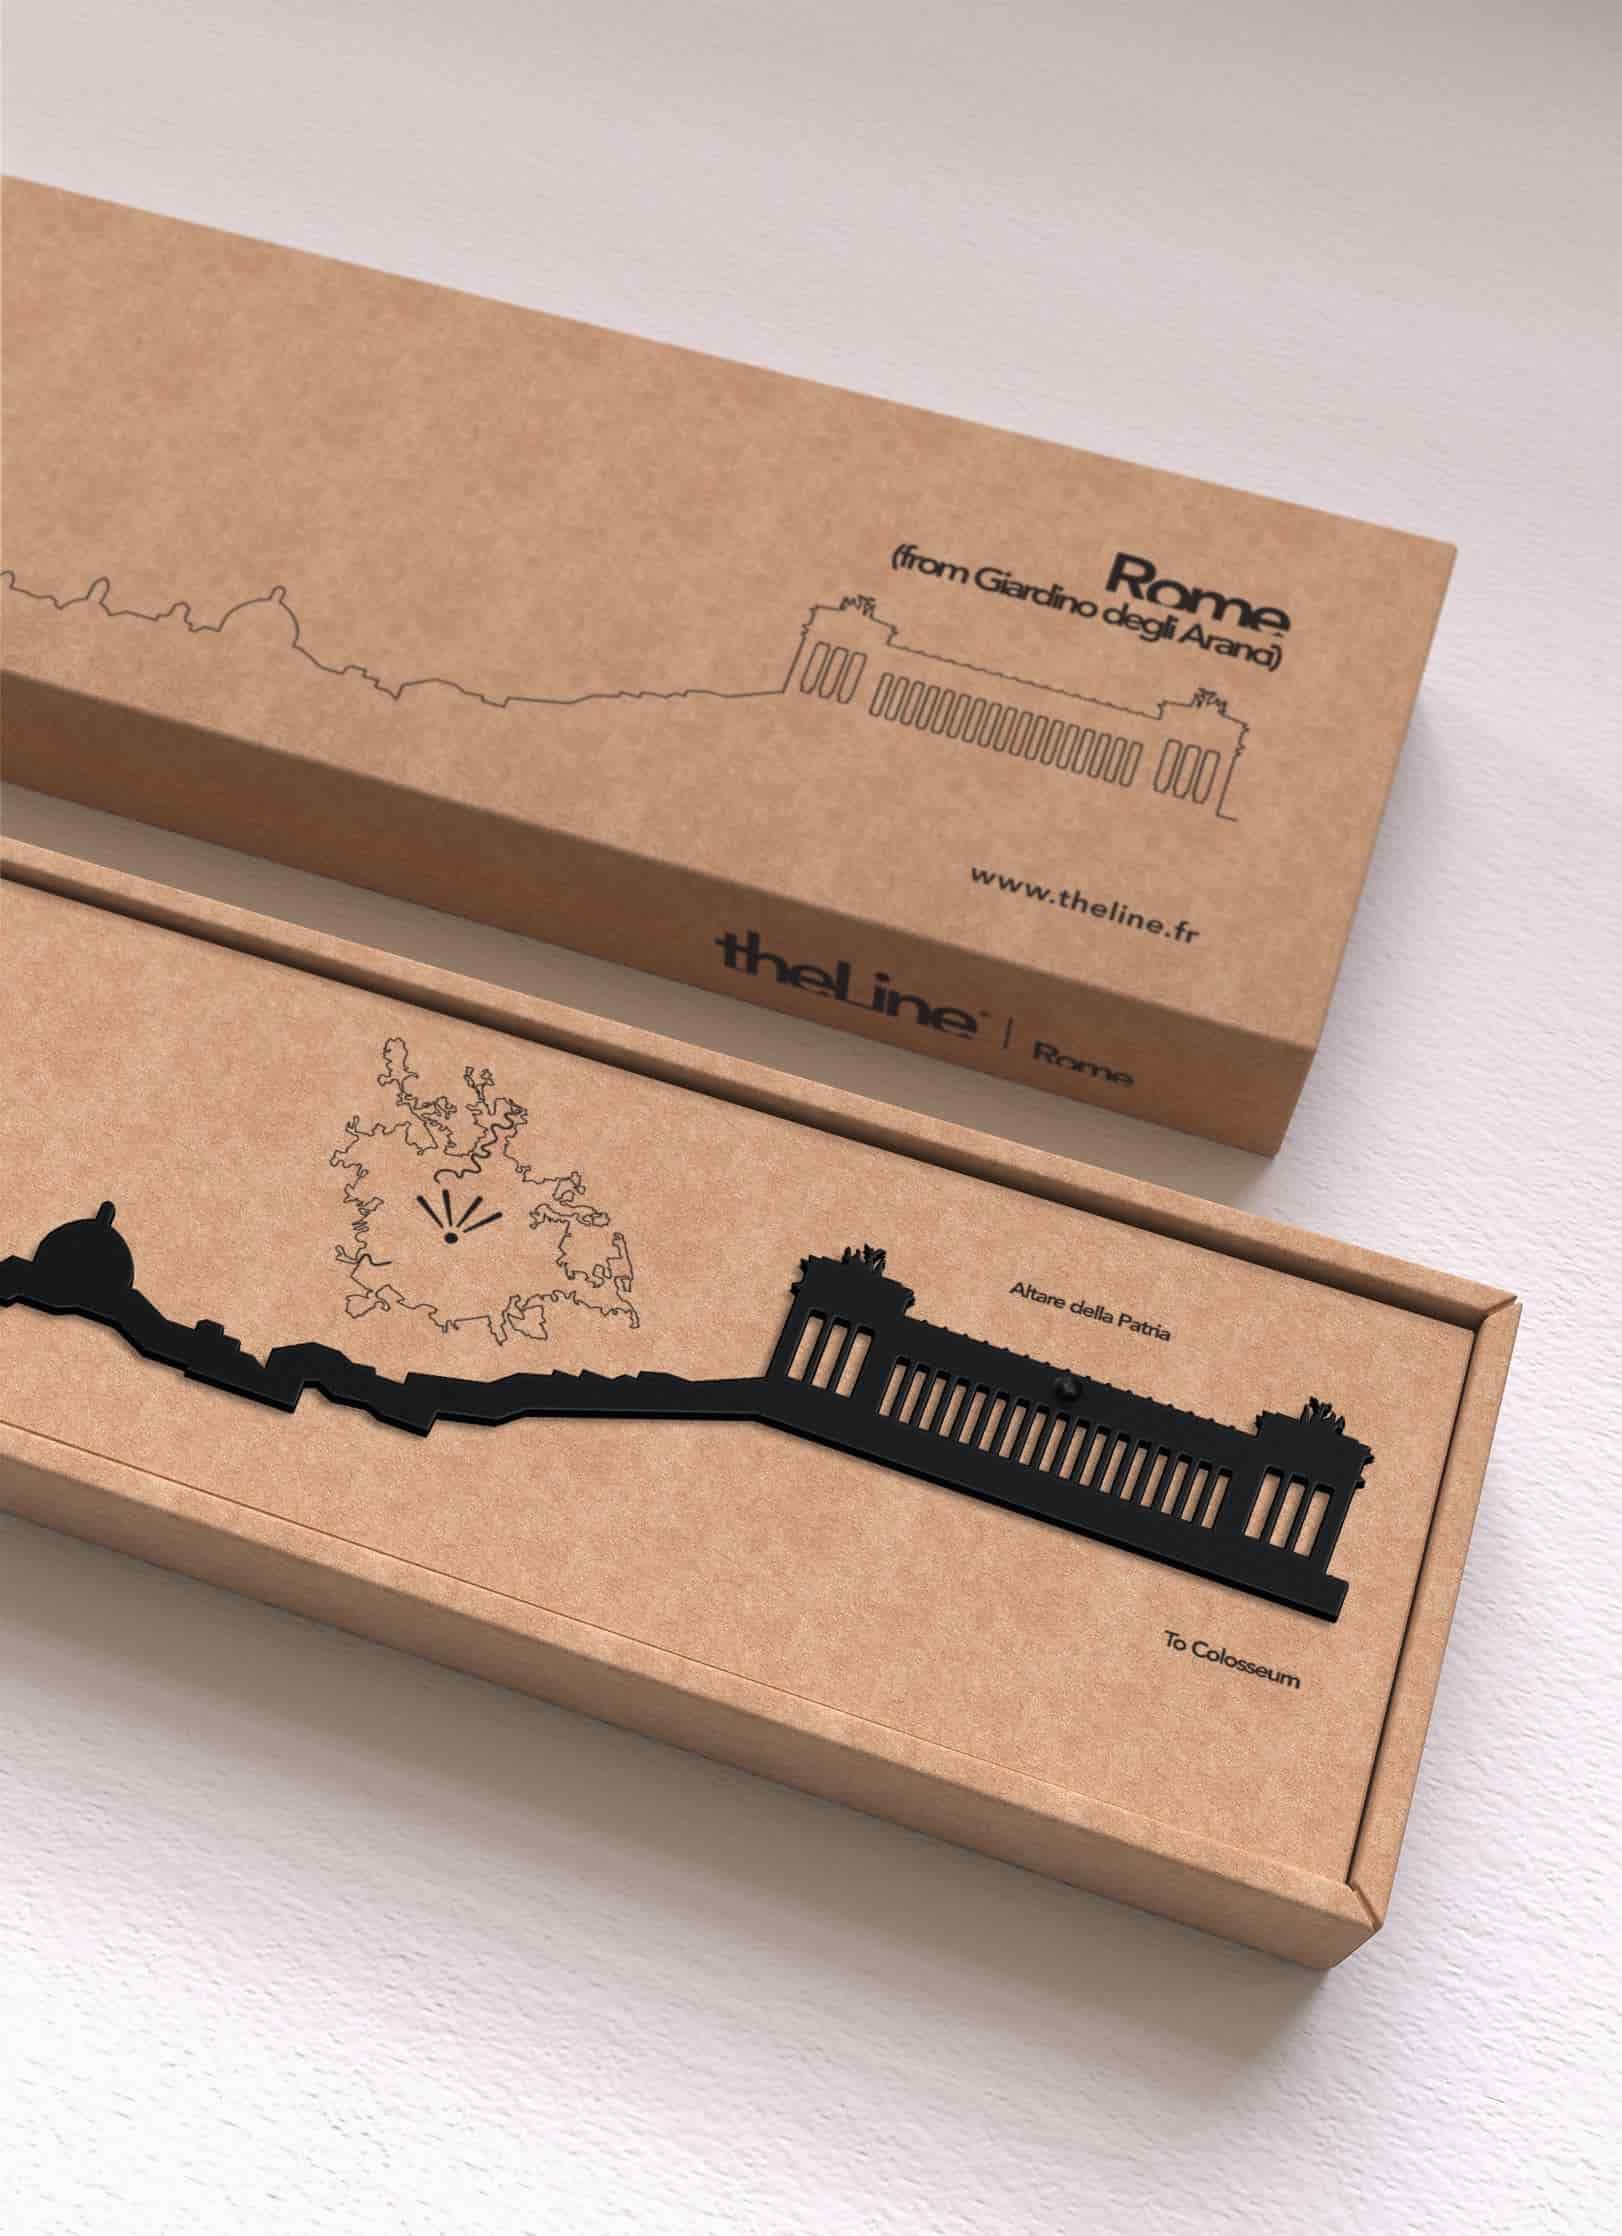 Rome wall decoration packaging